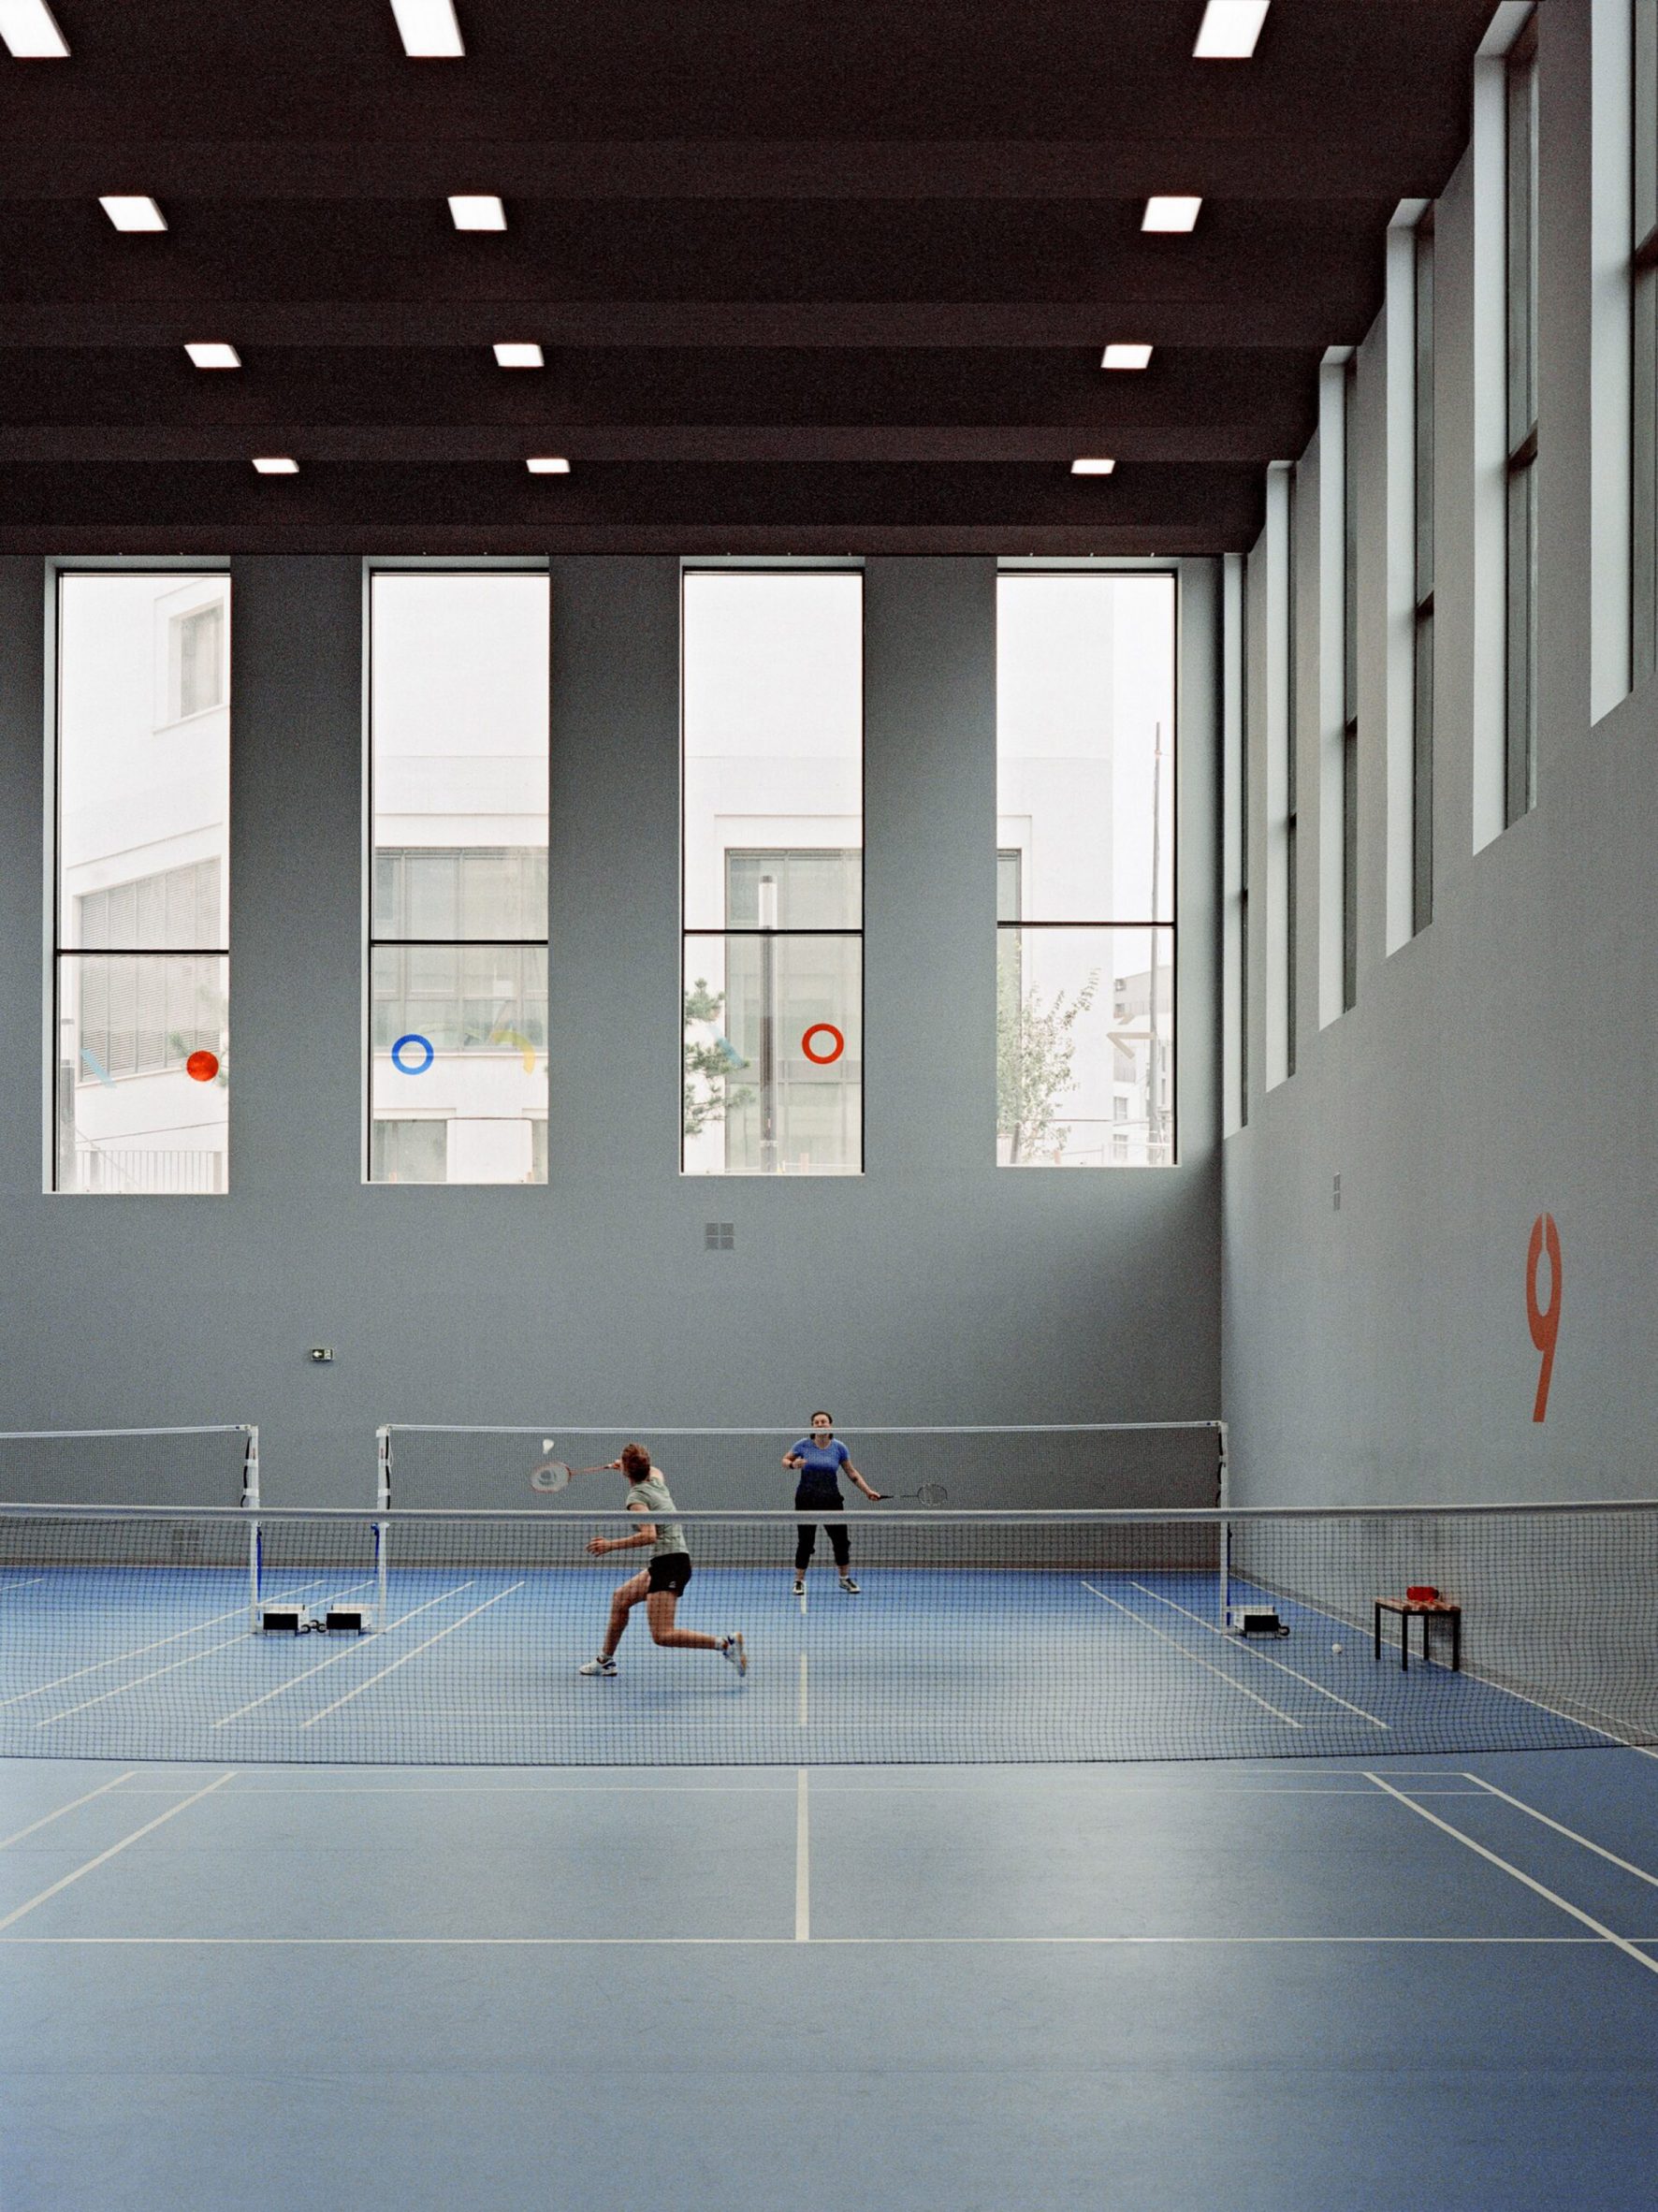 Tennis court in a sports centre